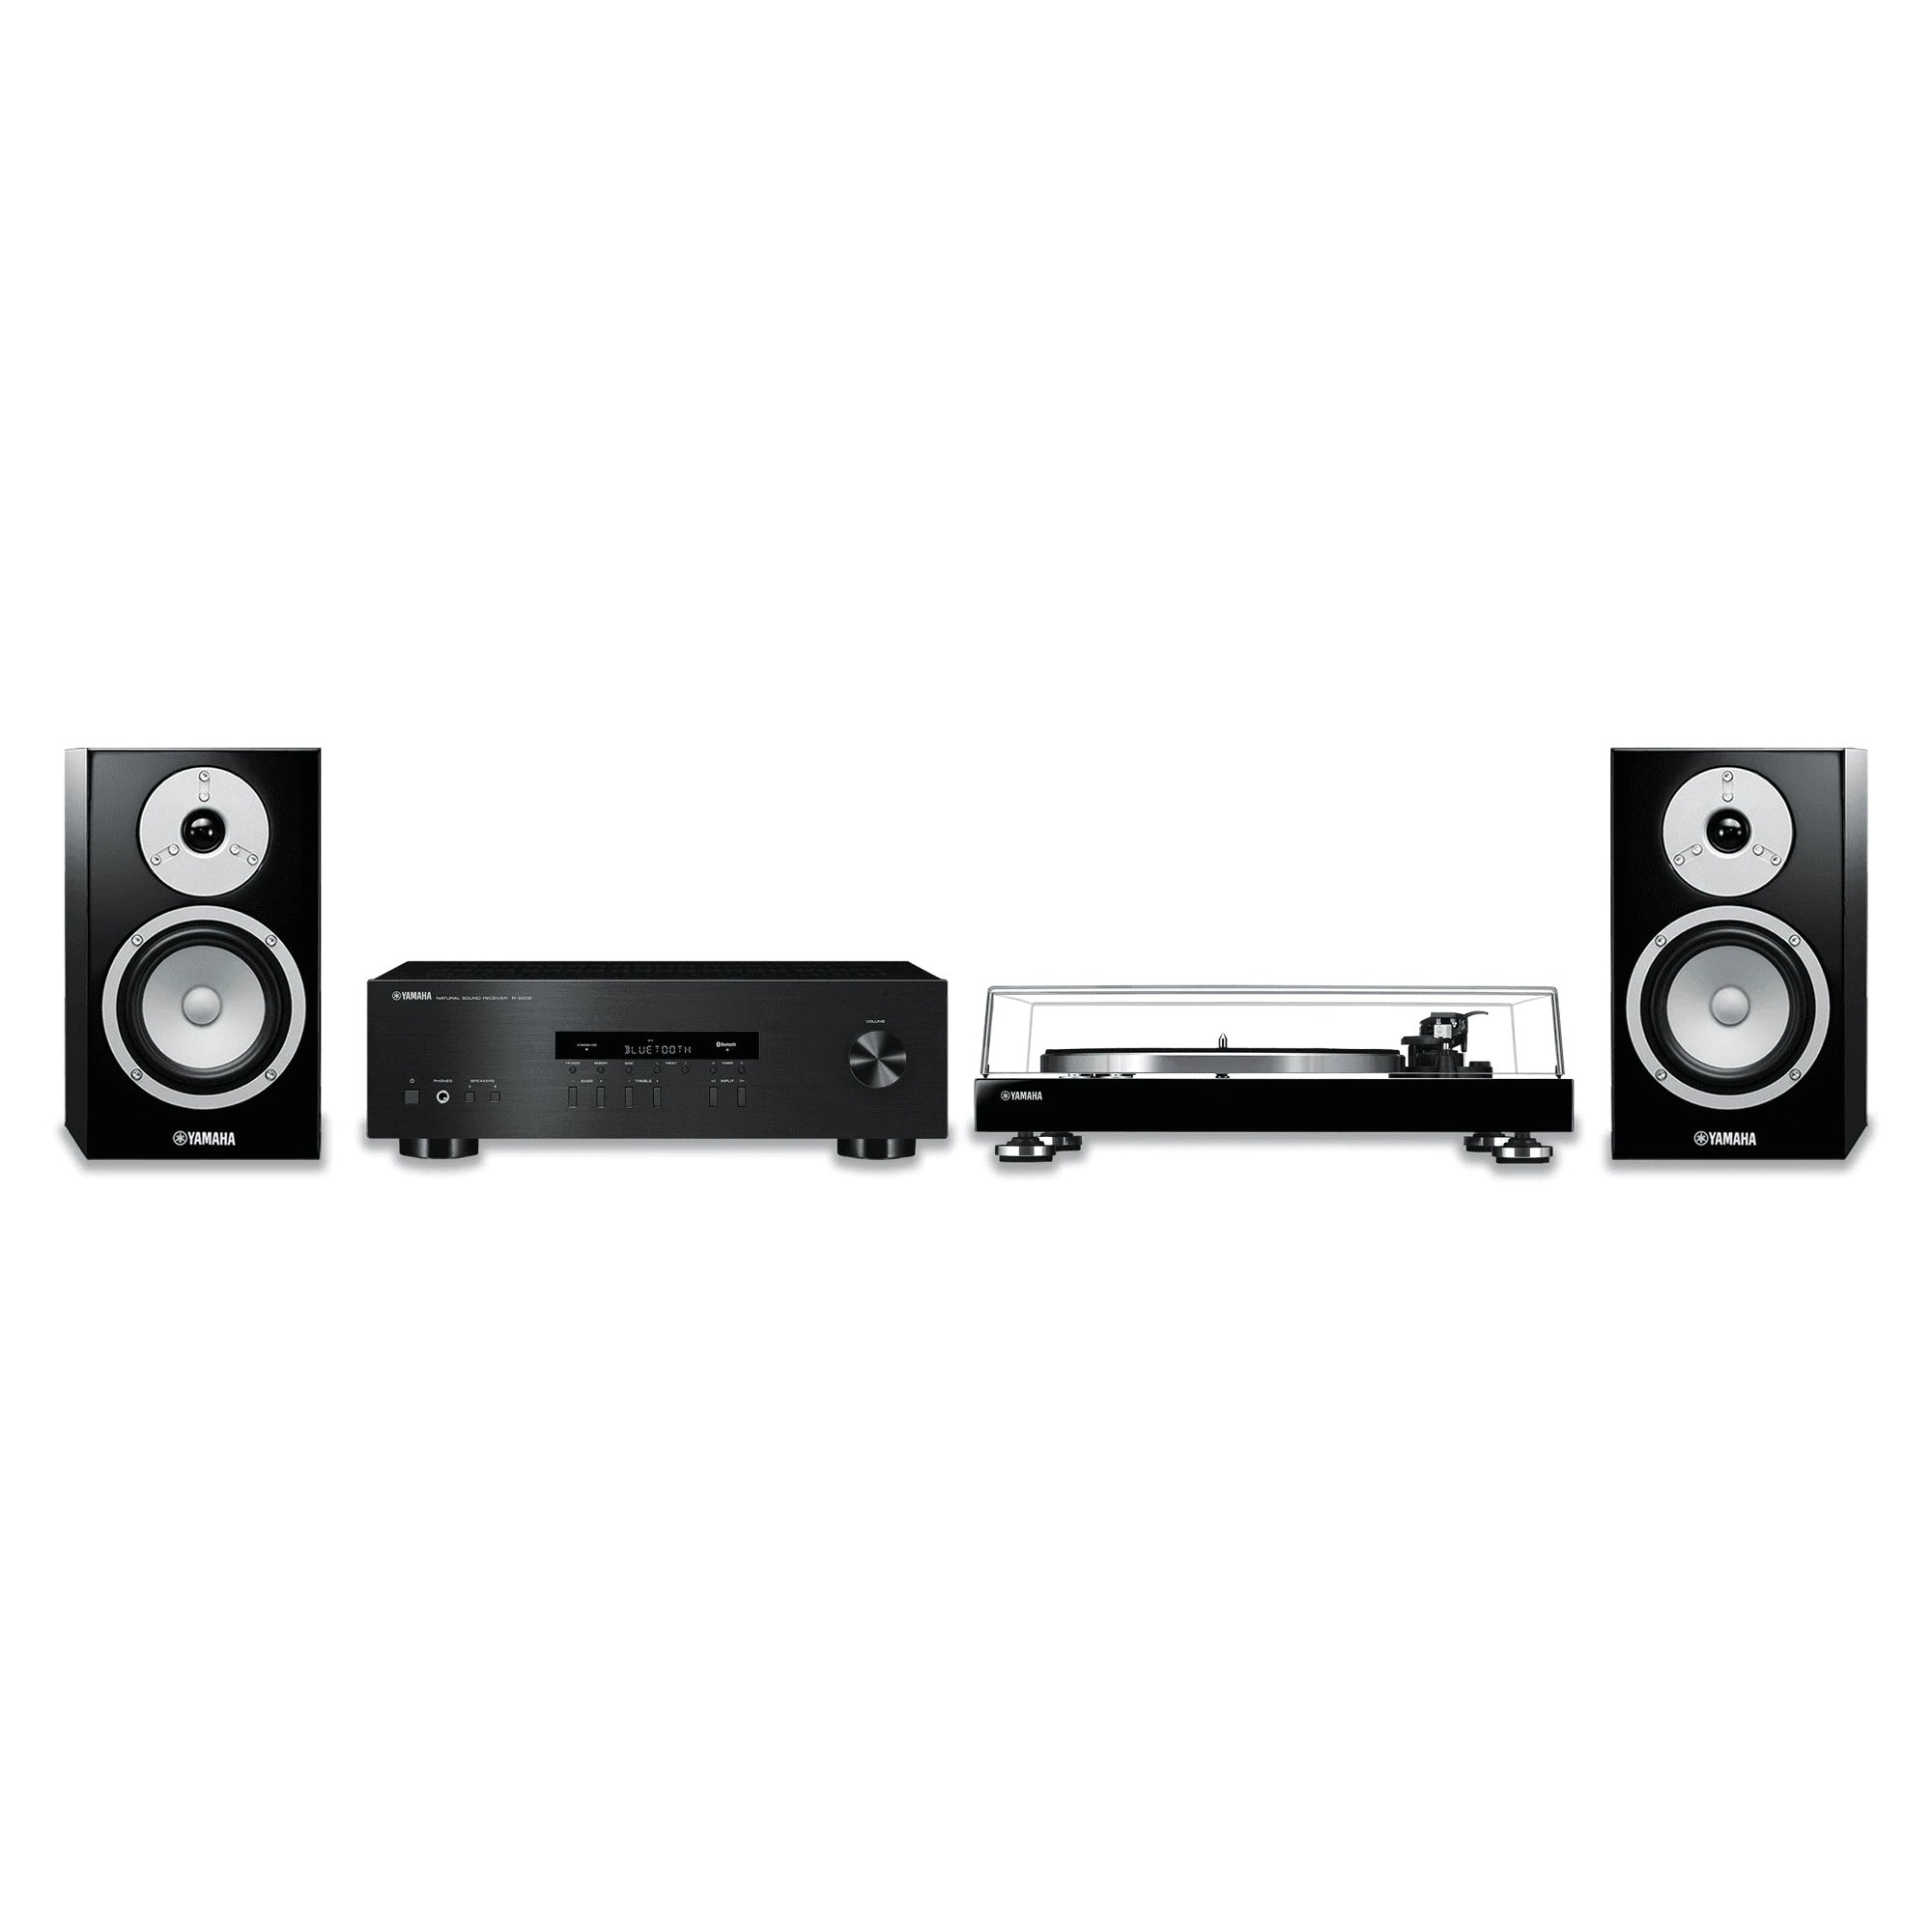 Yamaha HiFi Package #3 - RS202 2-Channel Receiver, TT-S303 Turntable and NS-BP301 Bookshelf Speakers (pair)